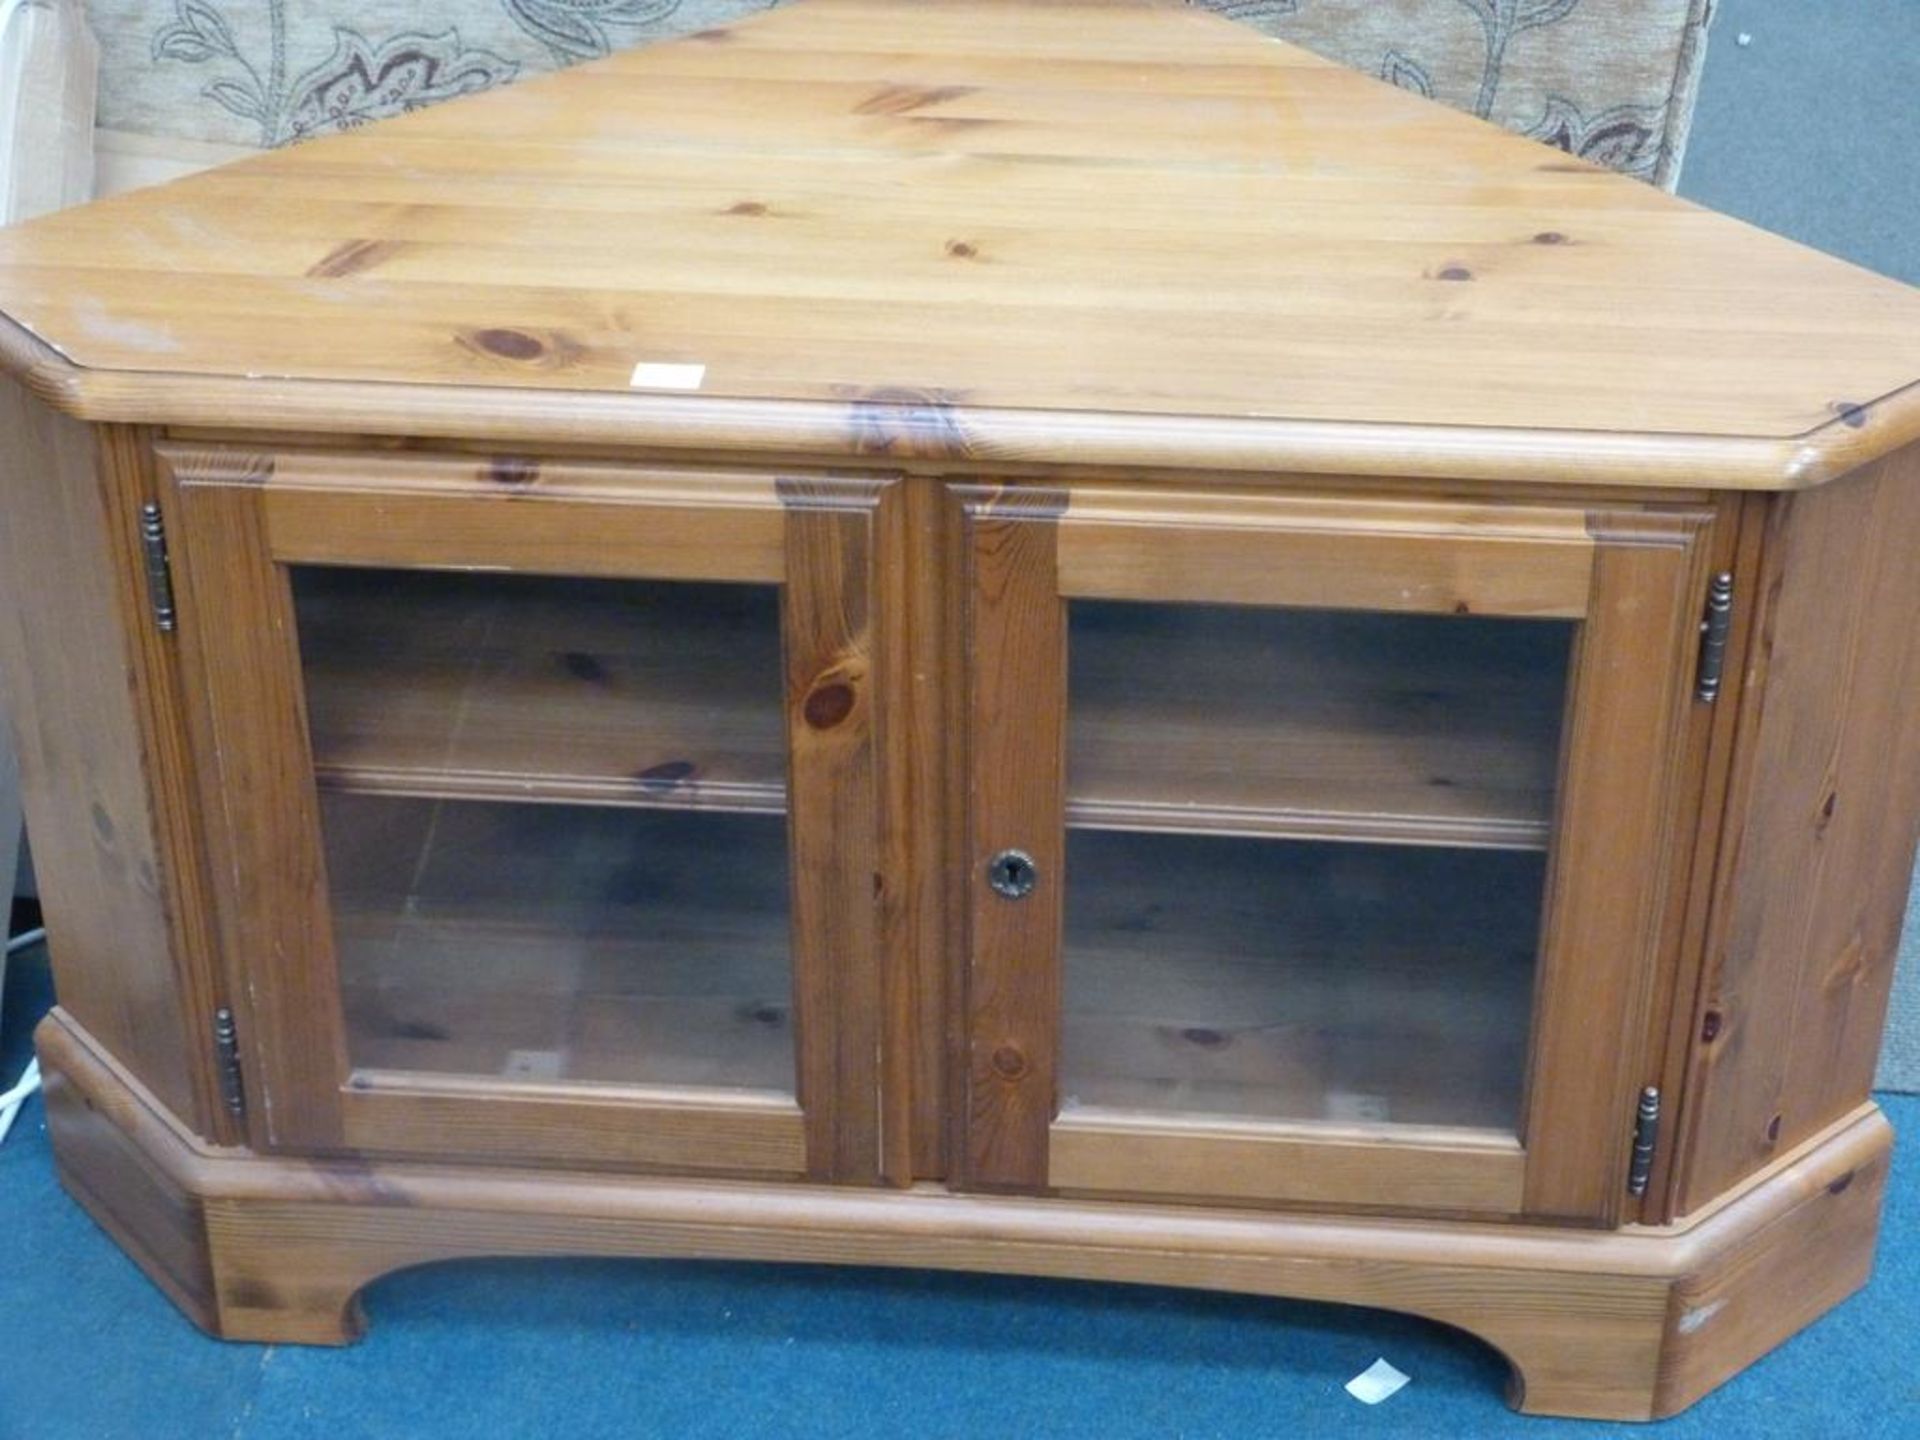 * A 'Ducal' modern Pine Corner TV Stand with Glazed Doors (est £20-£40)